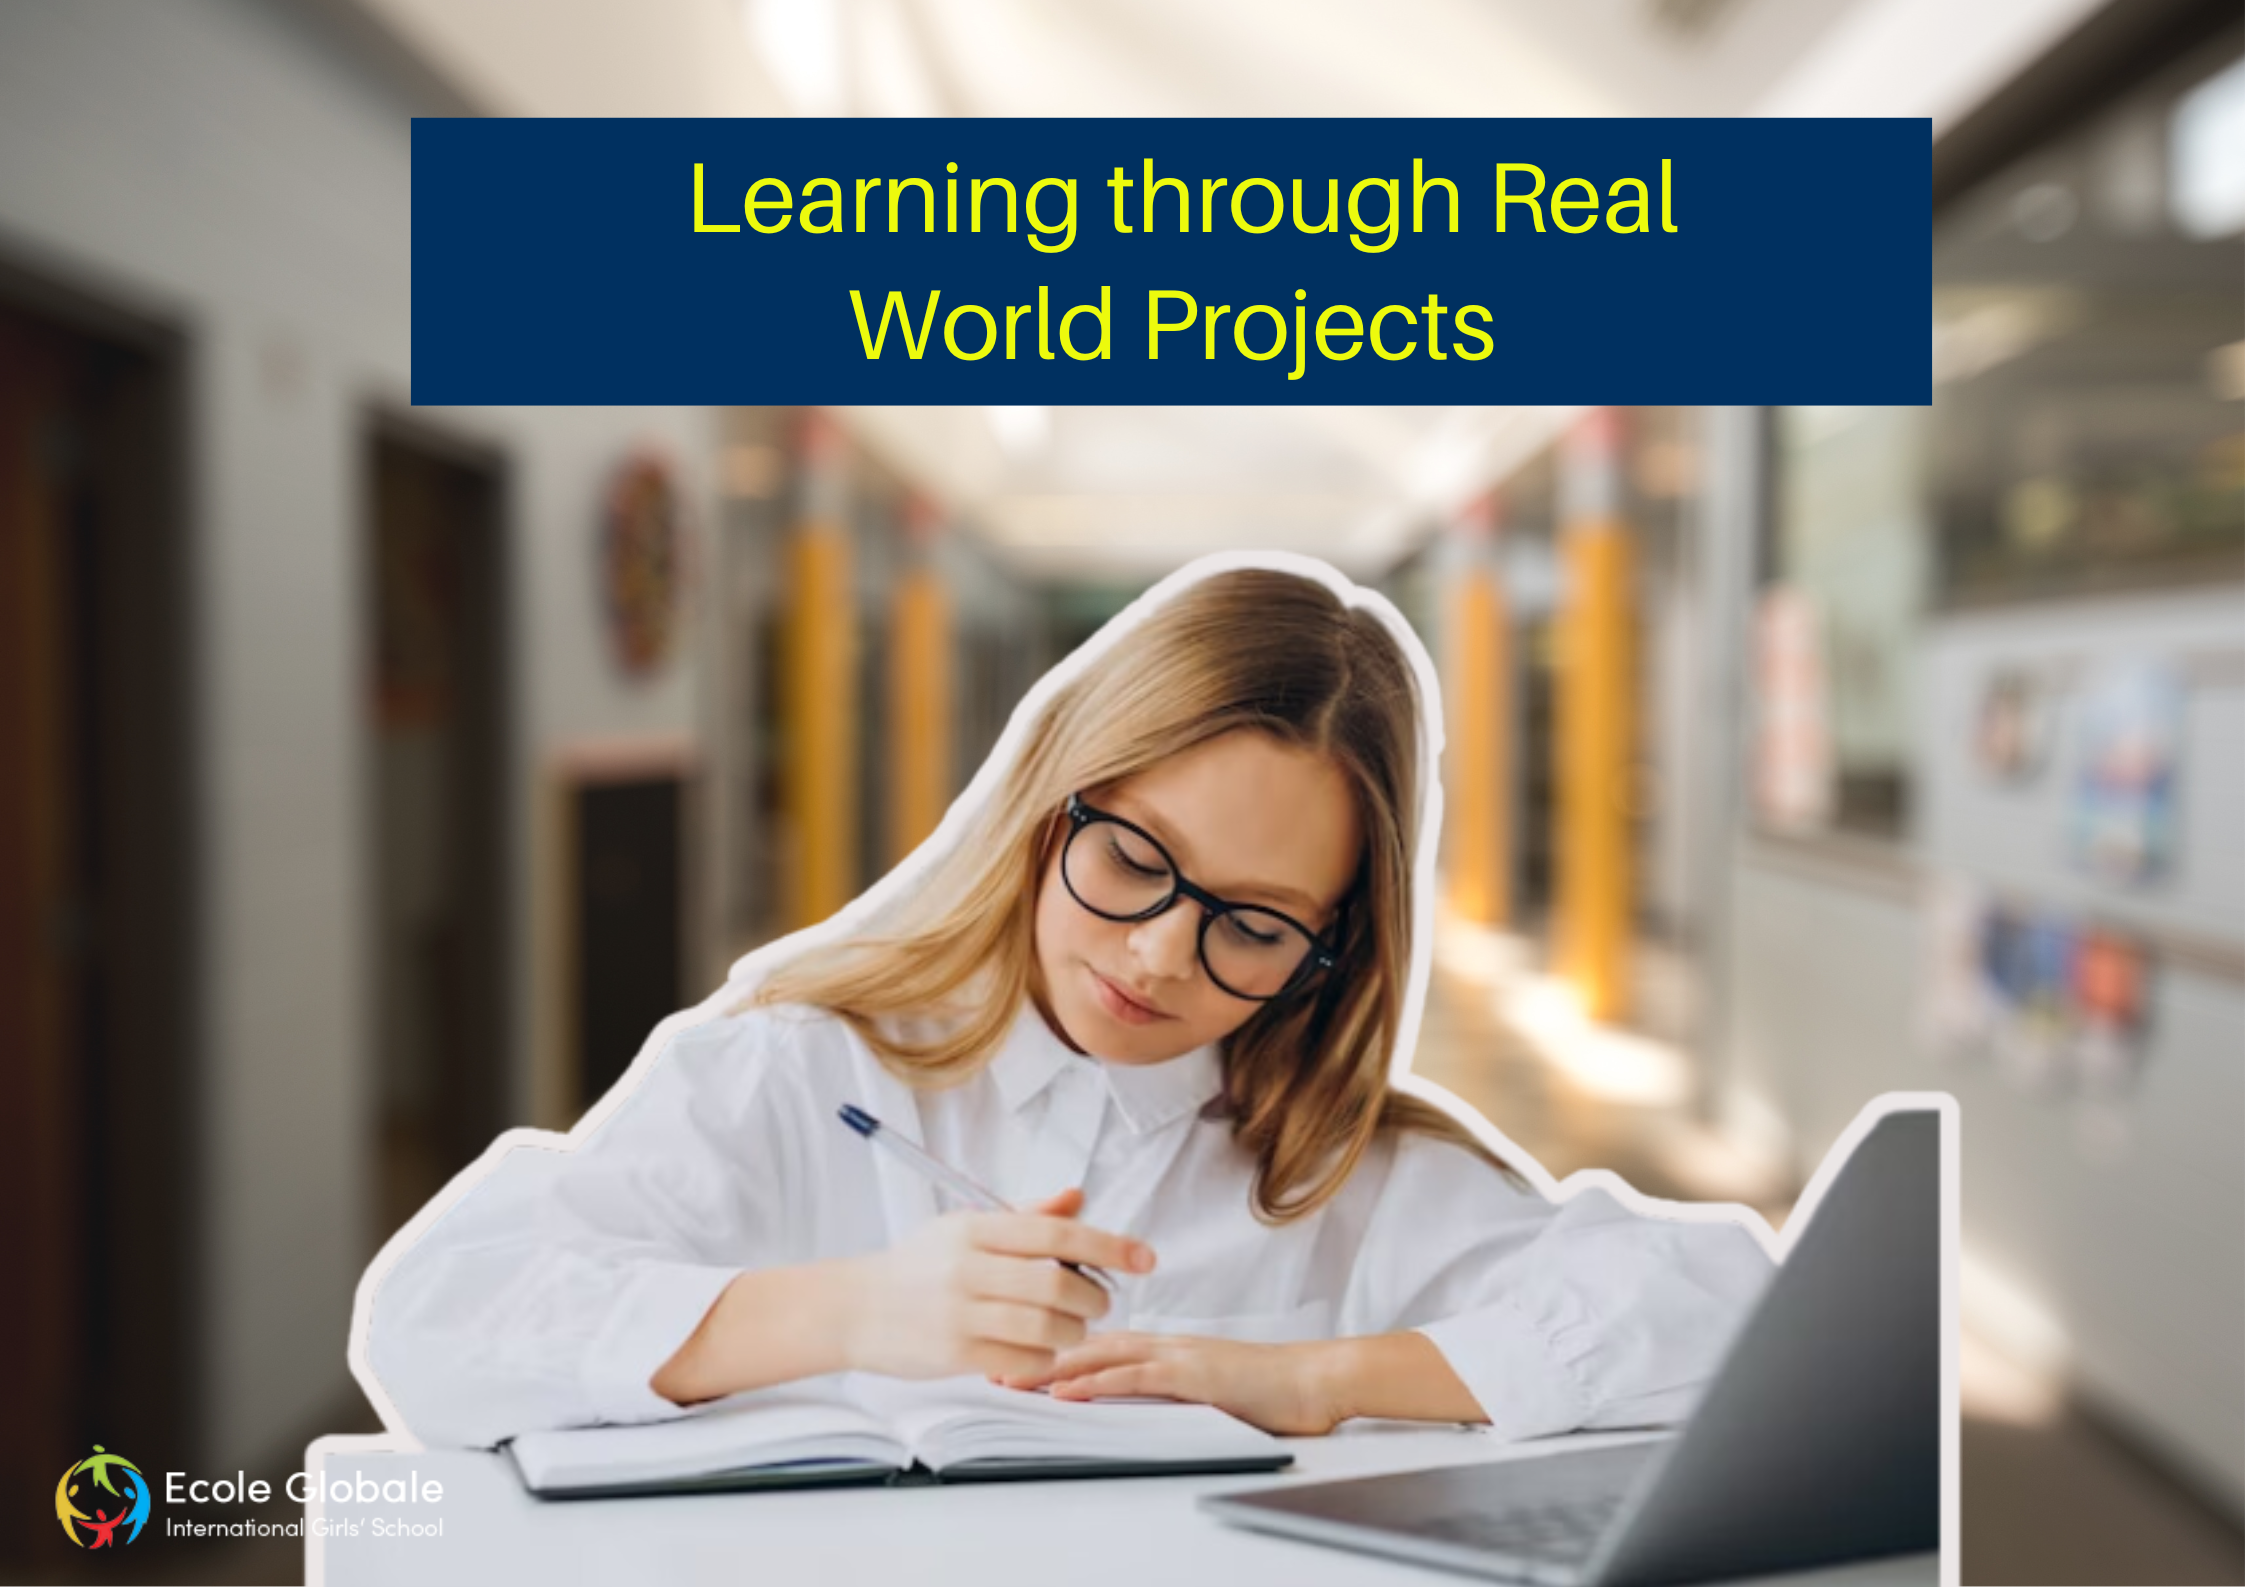 You are currently viewing Learning in Action | Real World Projects at Ecole Globale